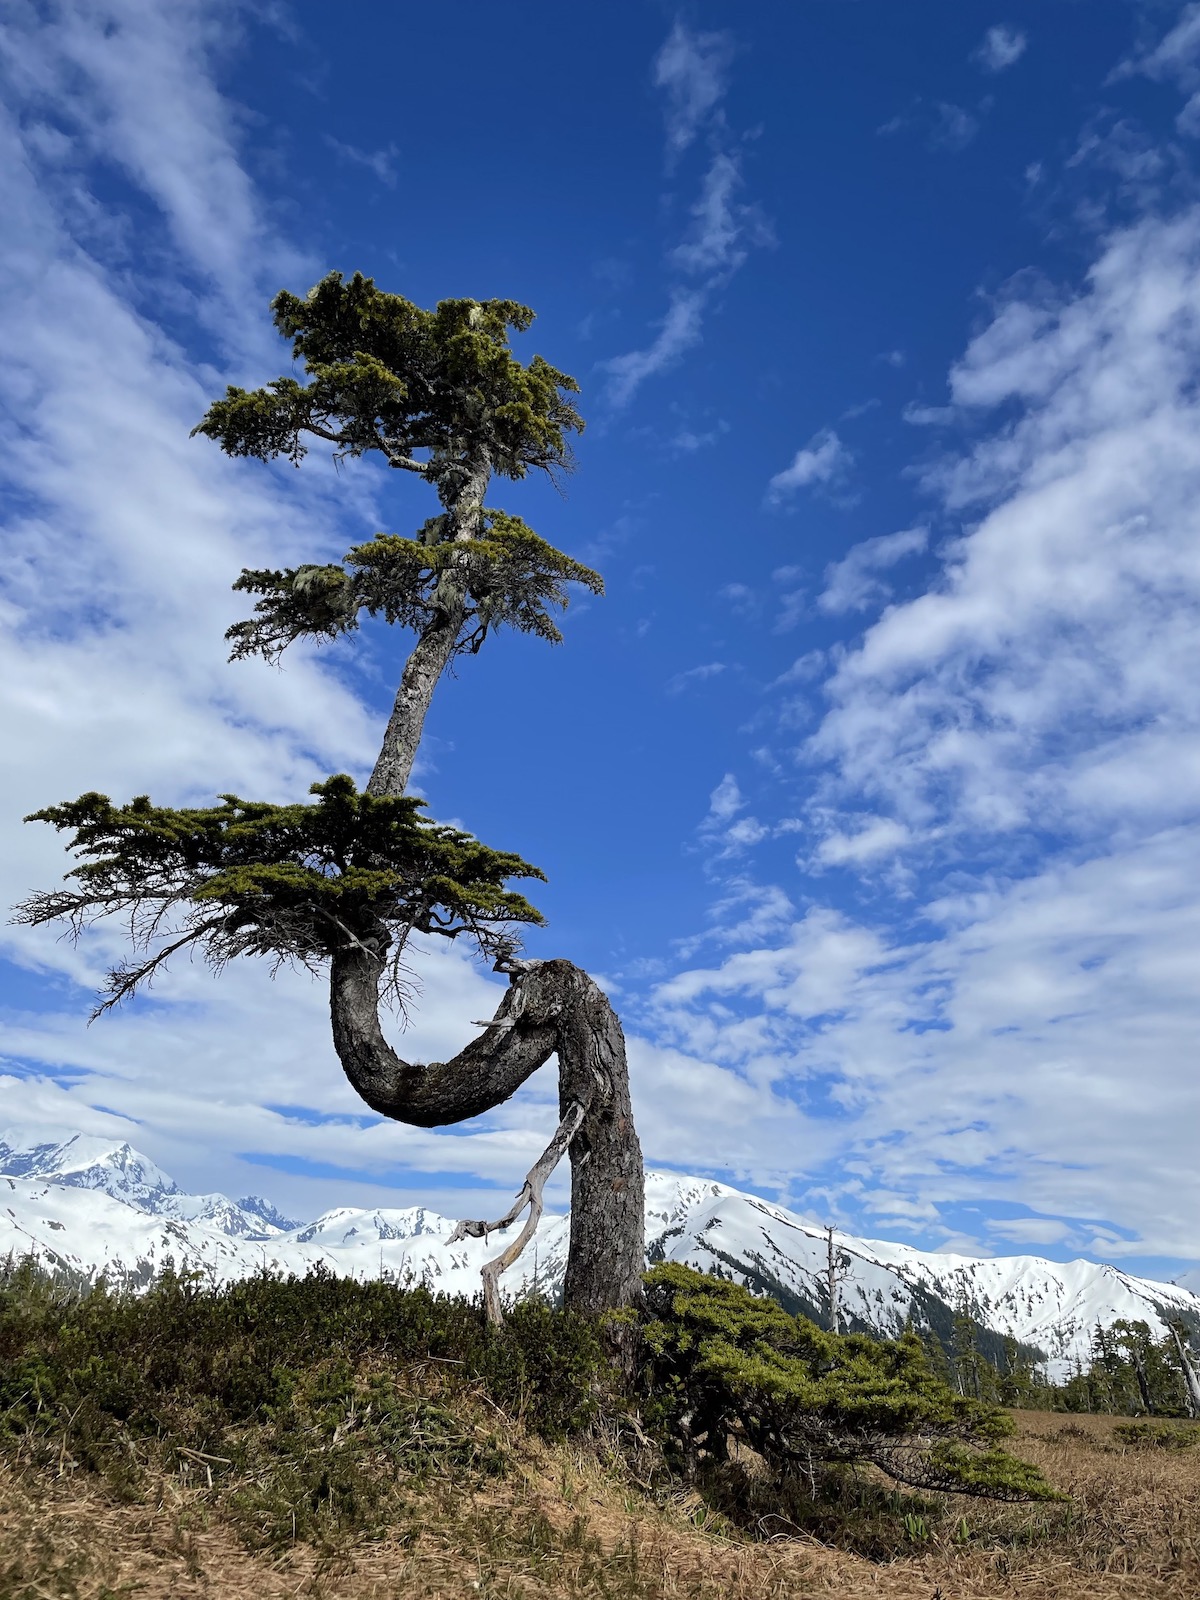 A twisted evergreen tree grows from a grassy field with mountains in the background.